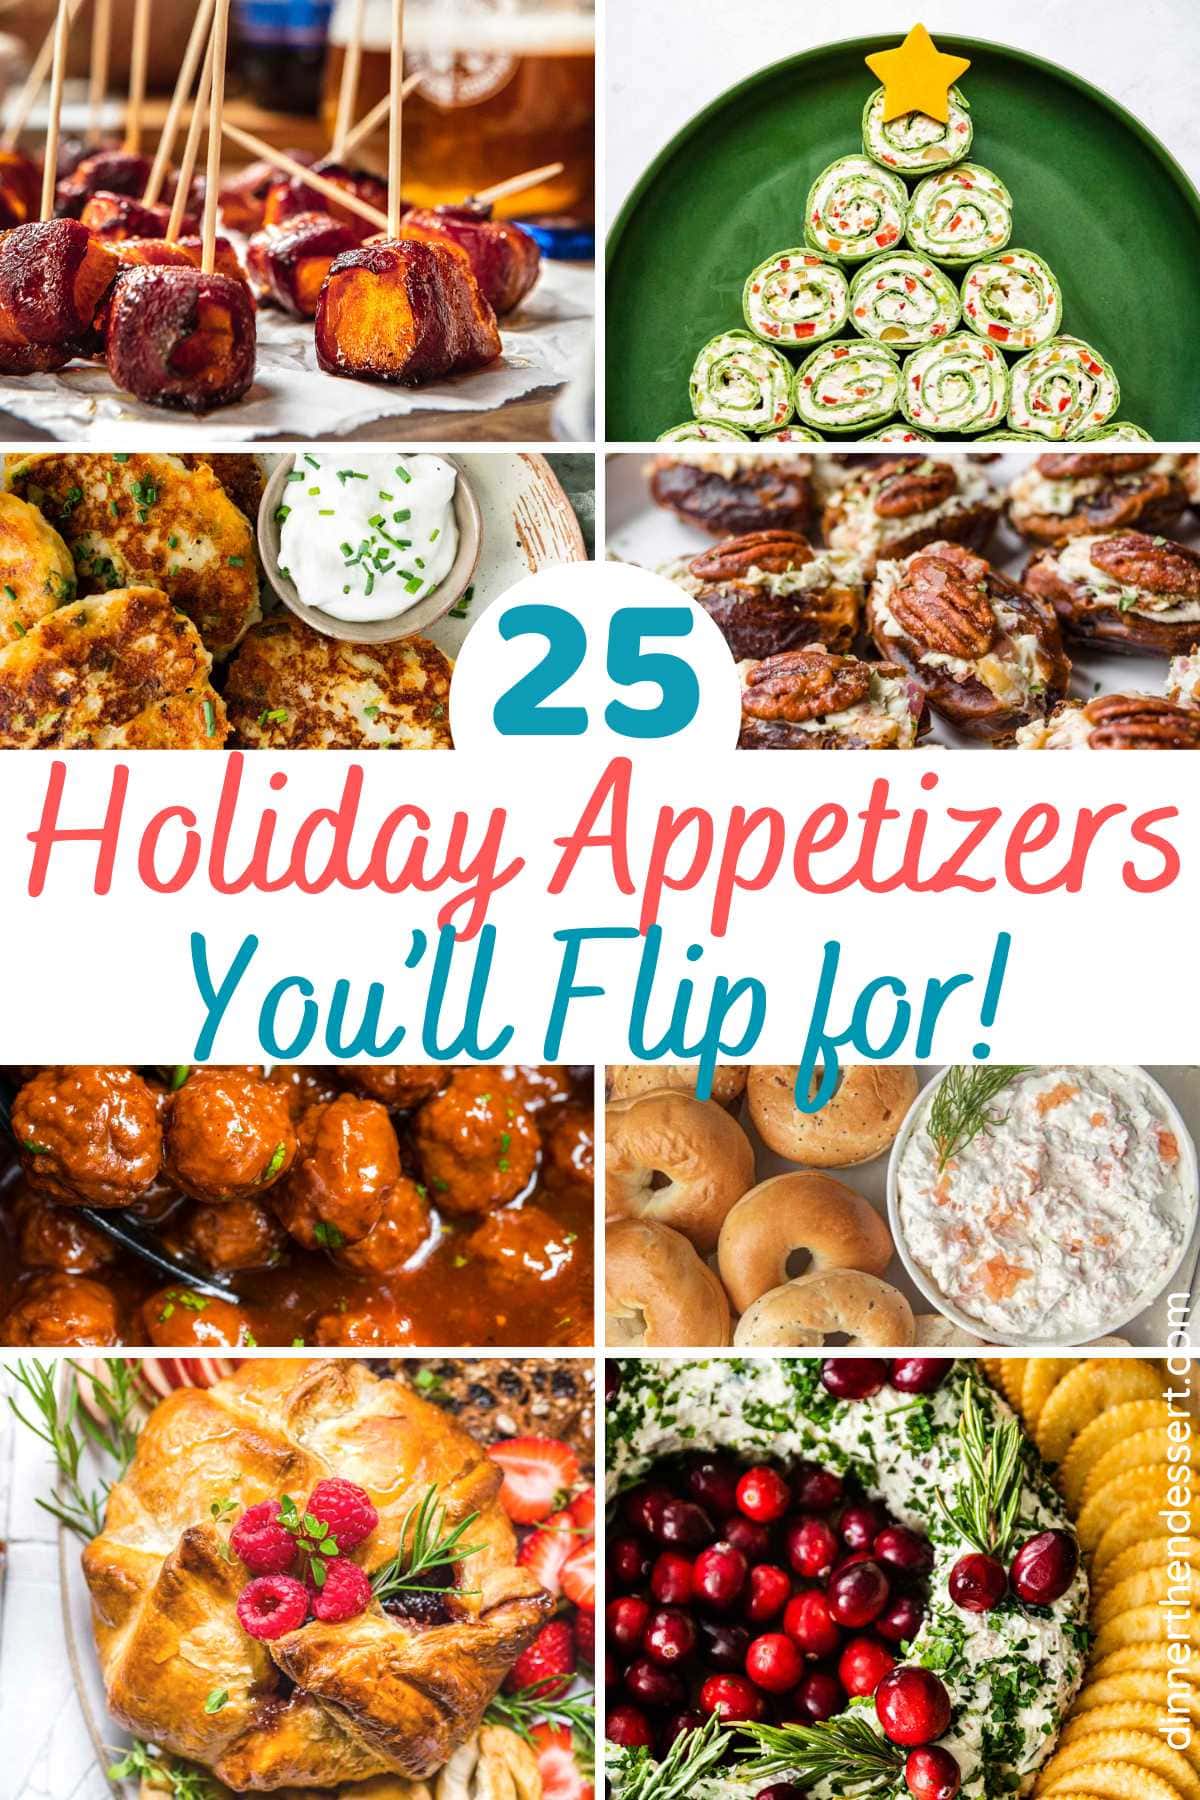 25 Holiday Appetizers You'll Flip for! - Dinner, then Dessert